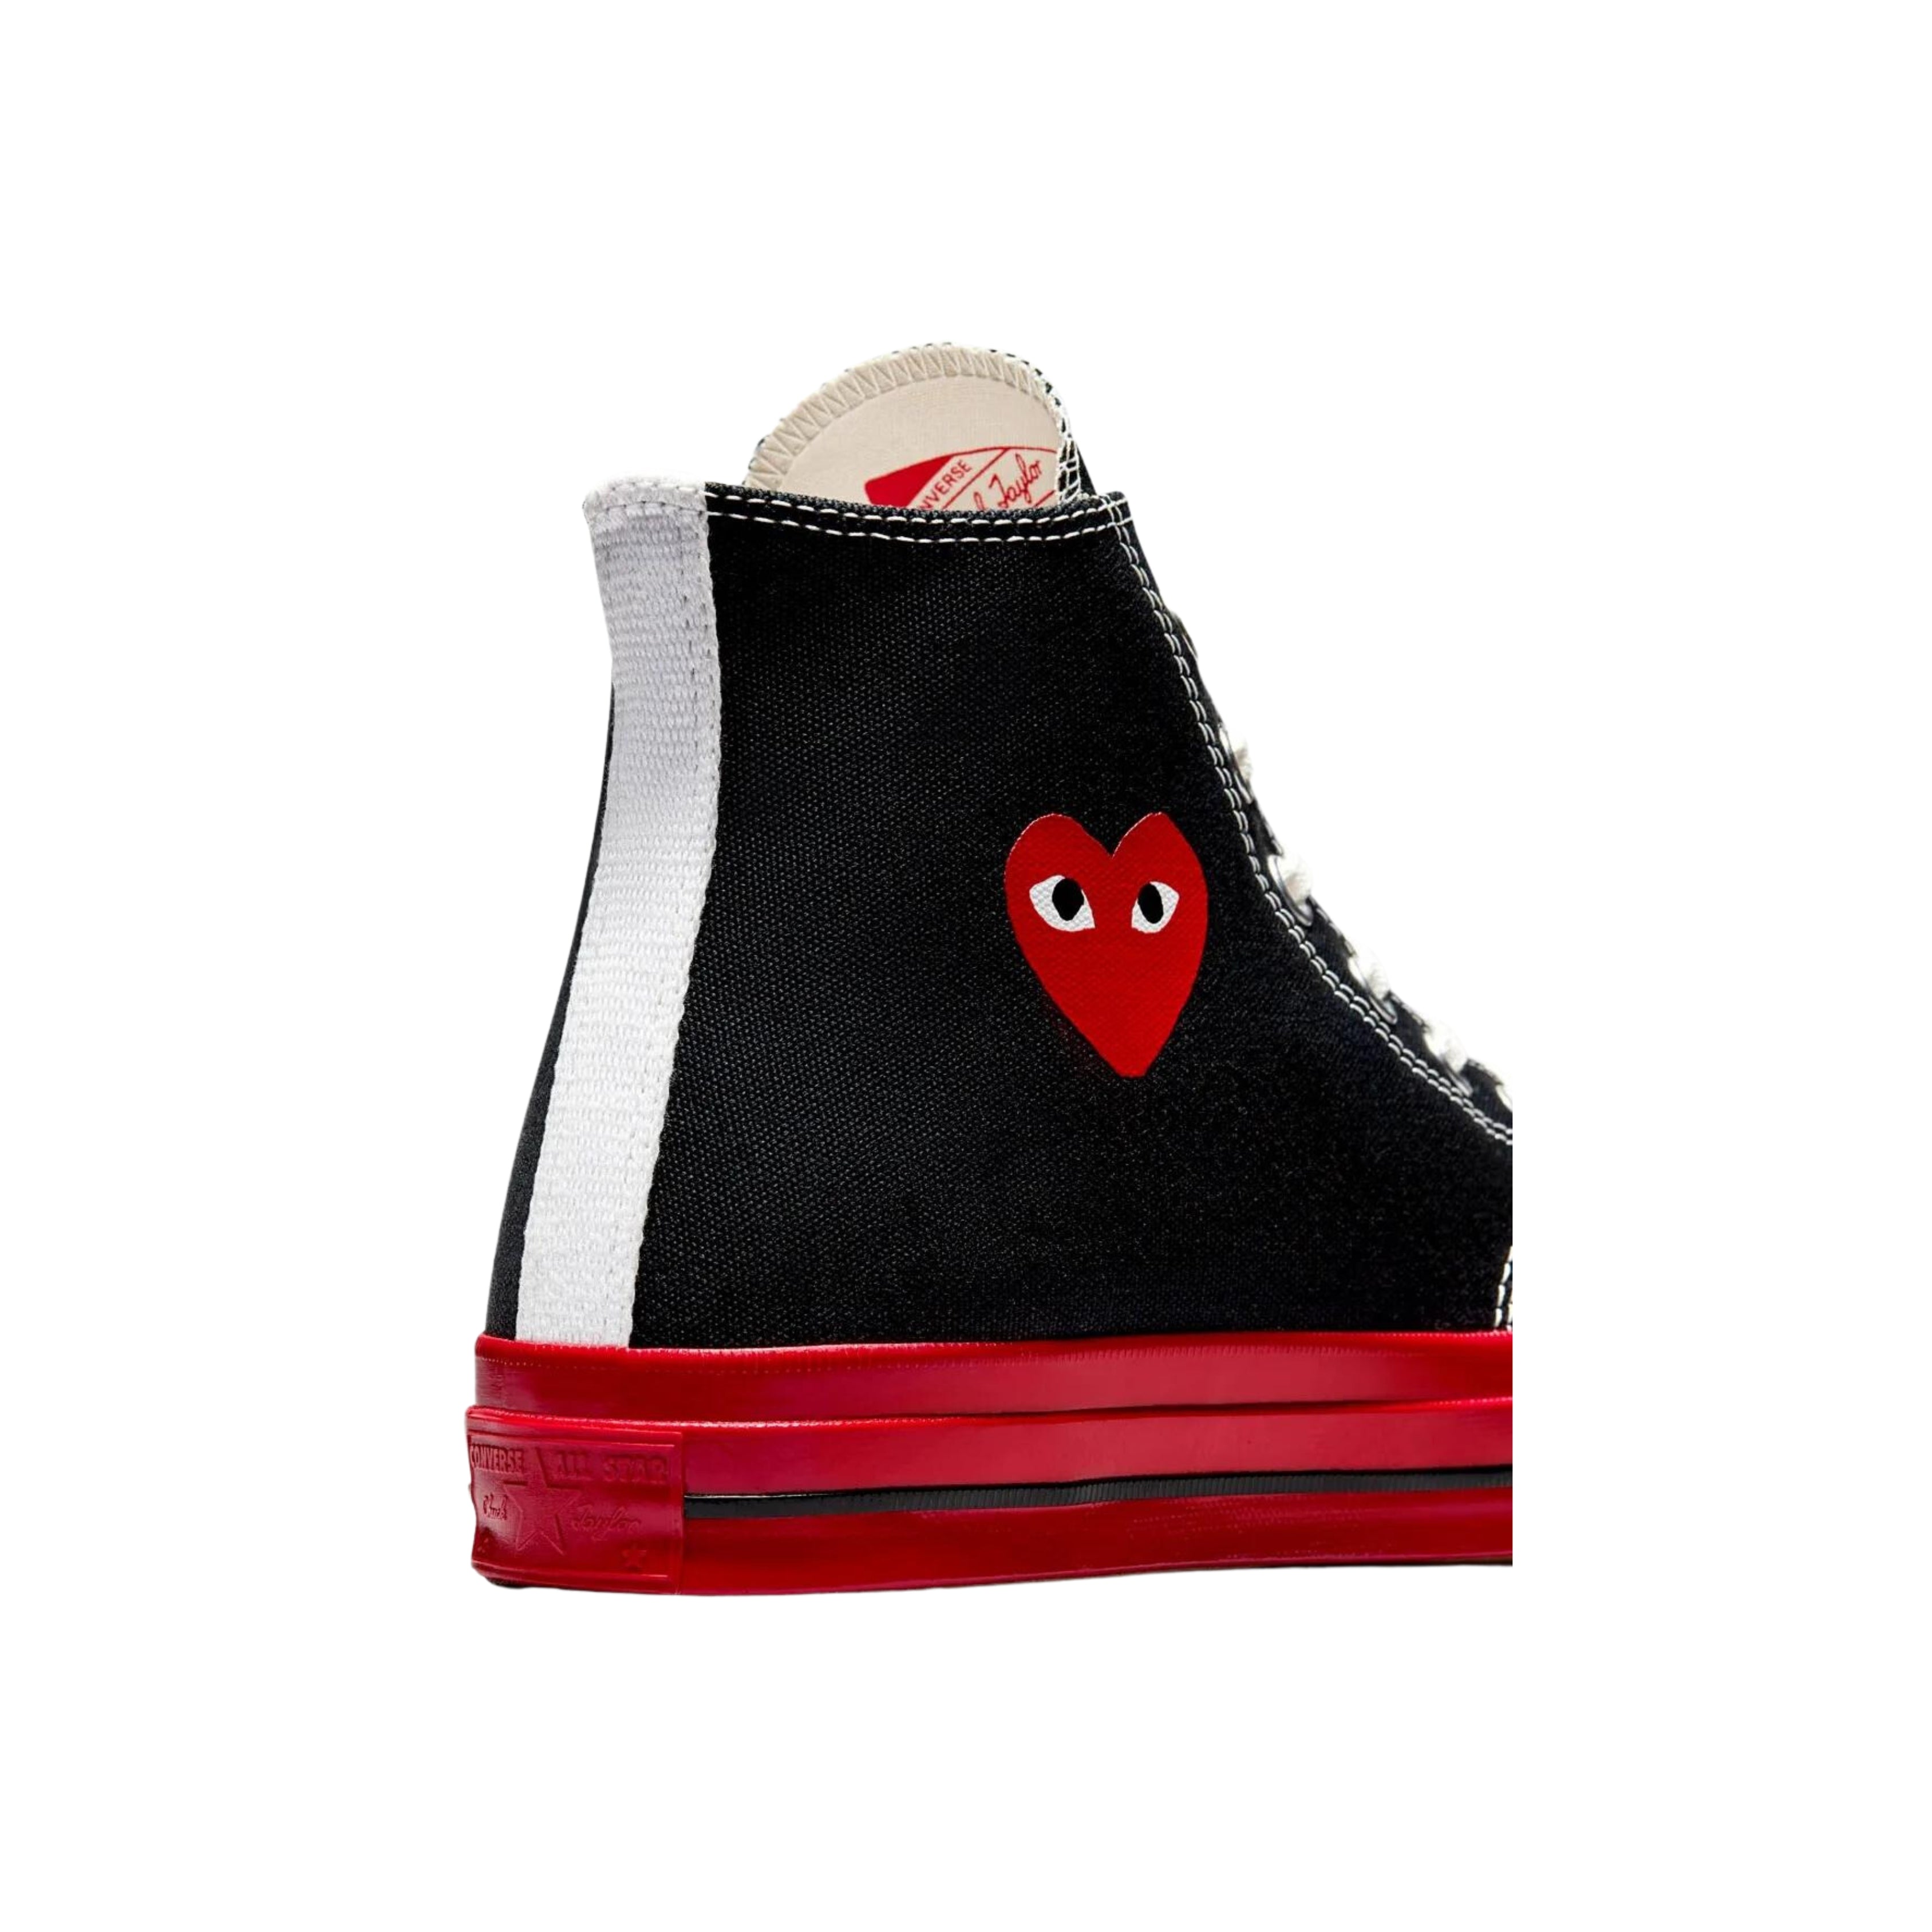 Converse Chuck Taylor All Star 70 Hi Comme des Garcons PLAY Black Red Midsole